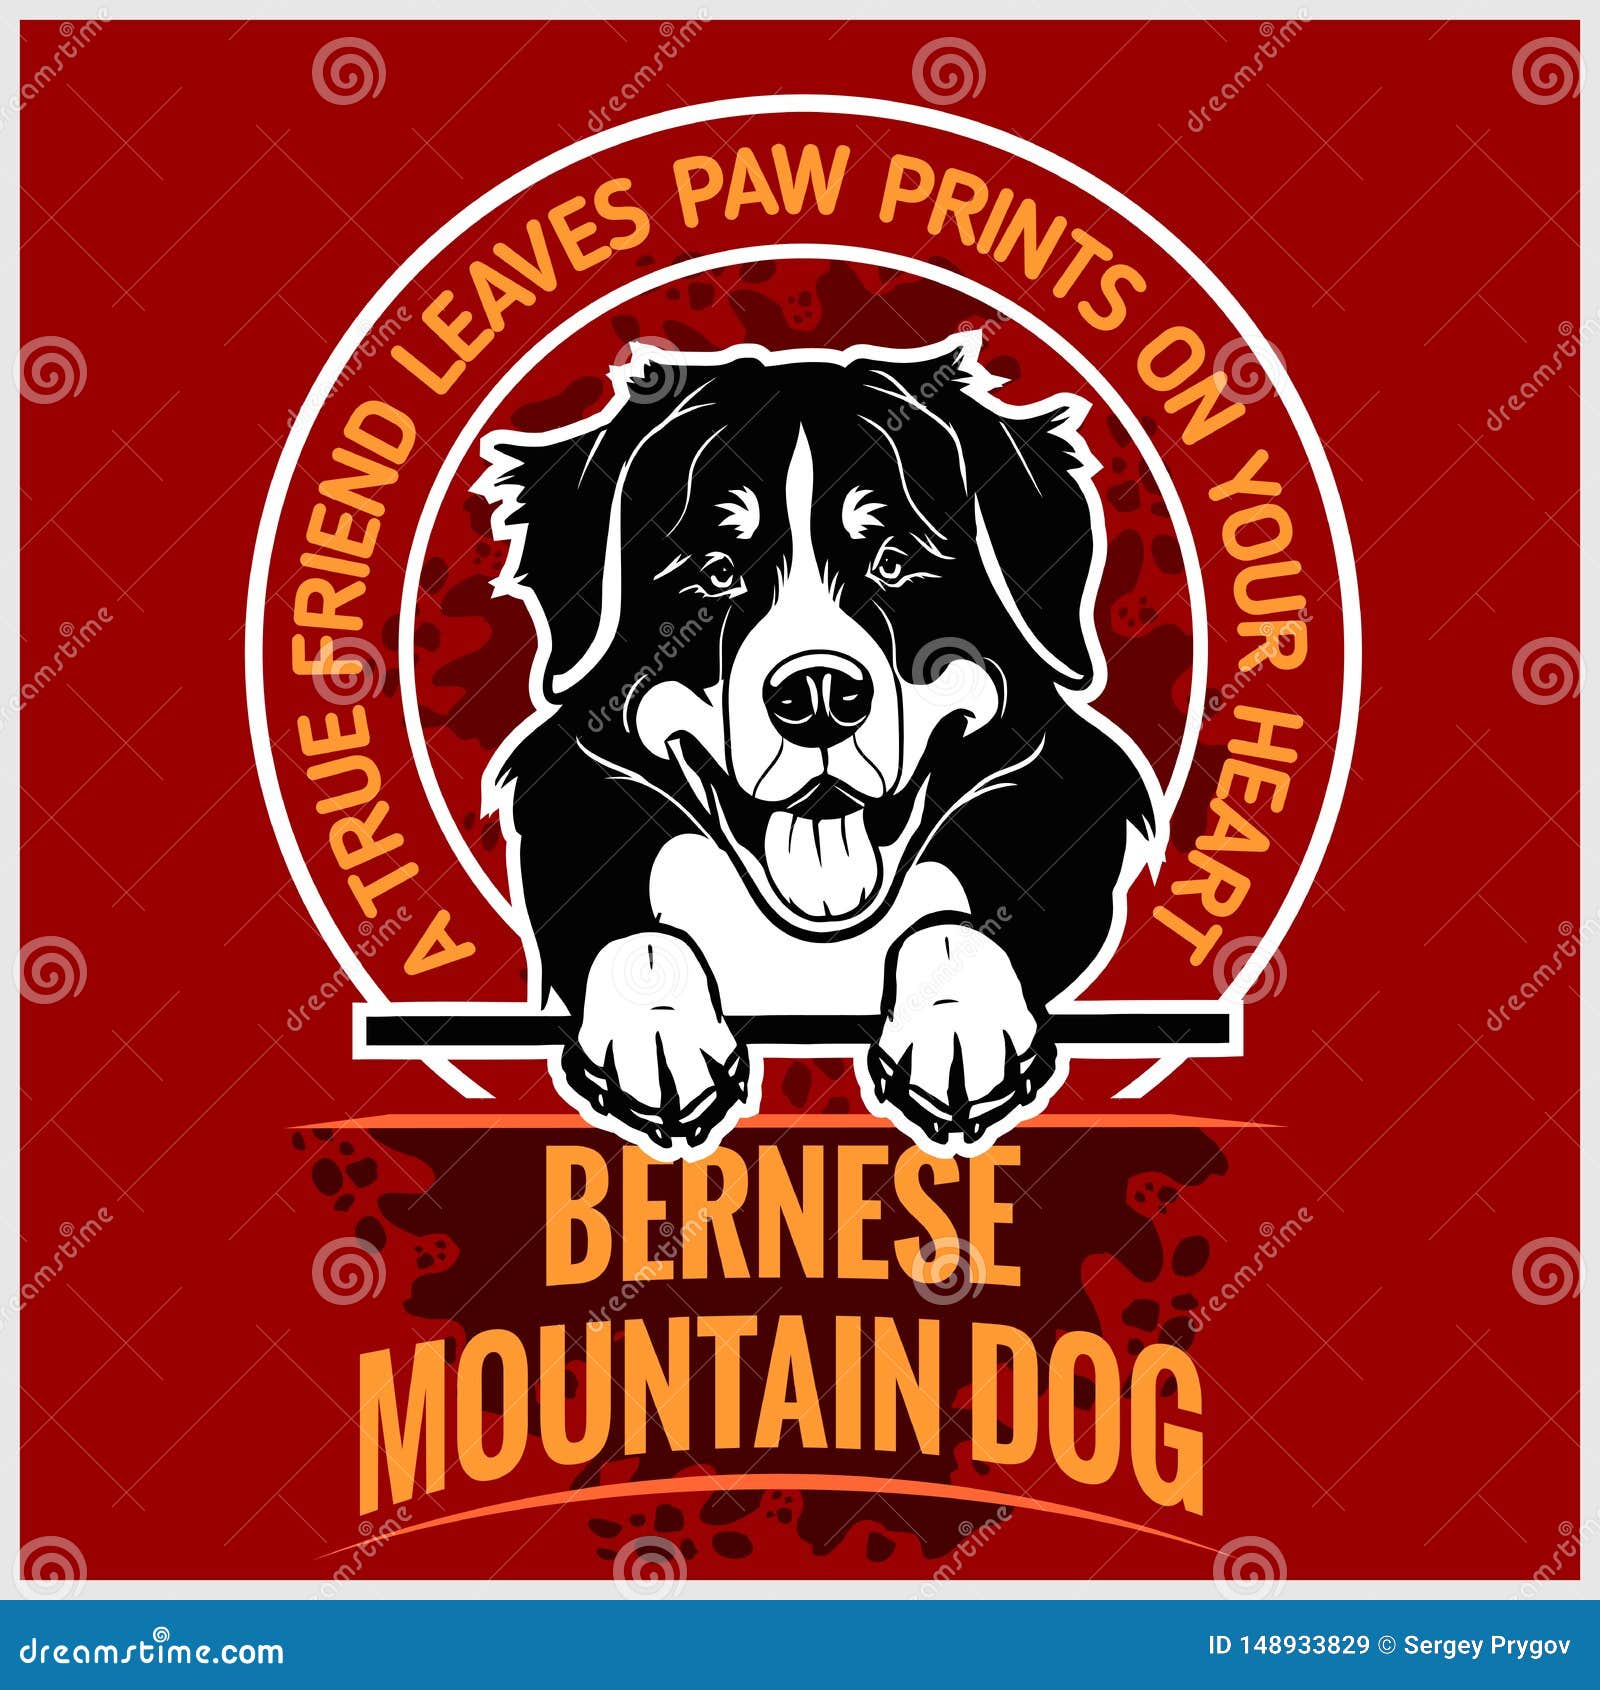 Bernese Mountain Dog - Vector Illustration for T-shirt, Logo and ...